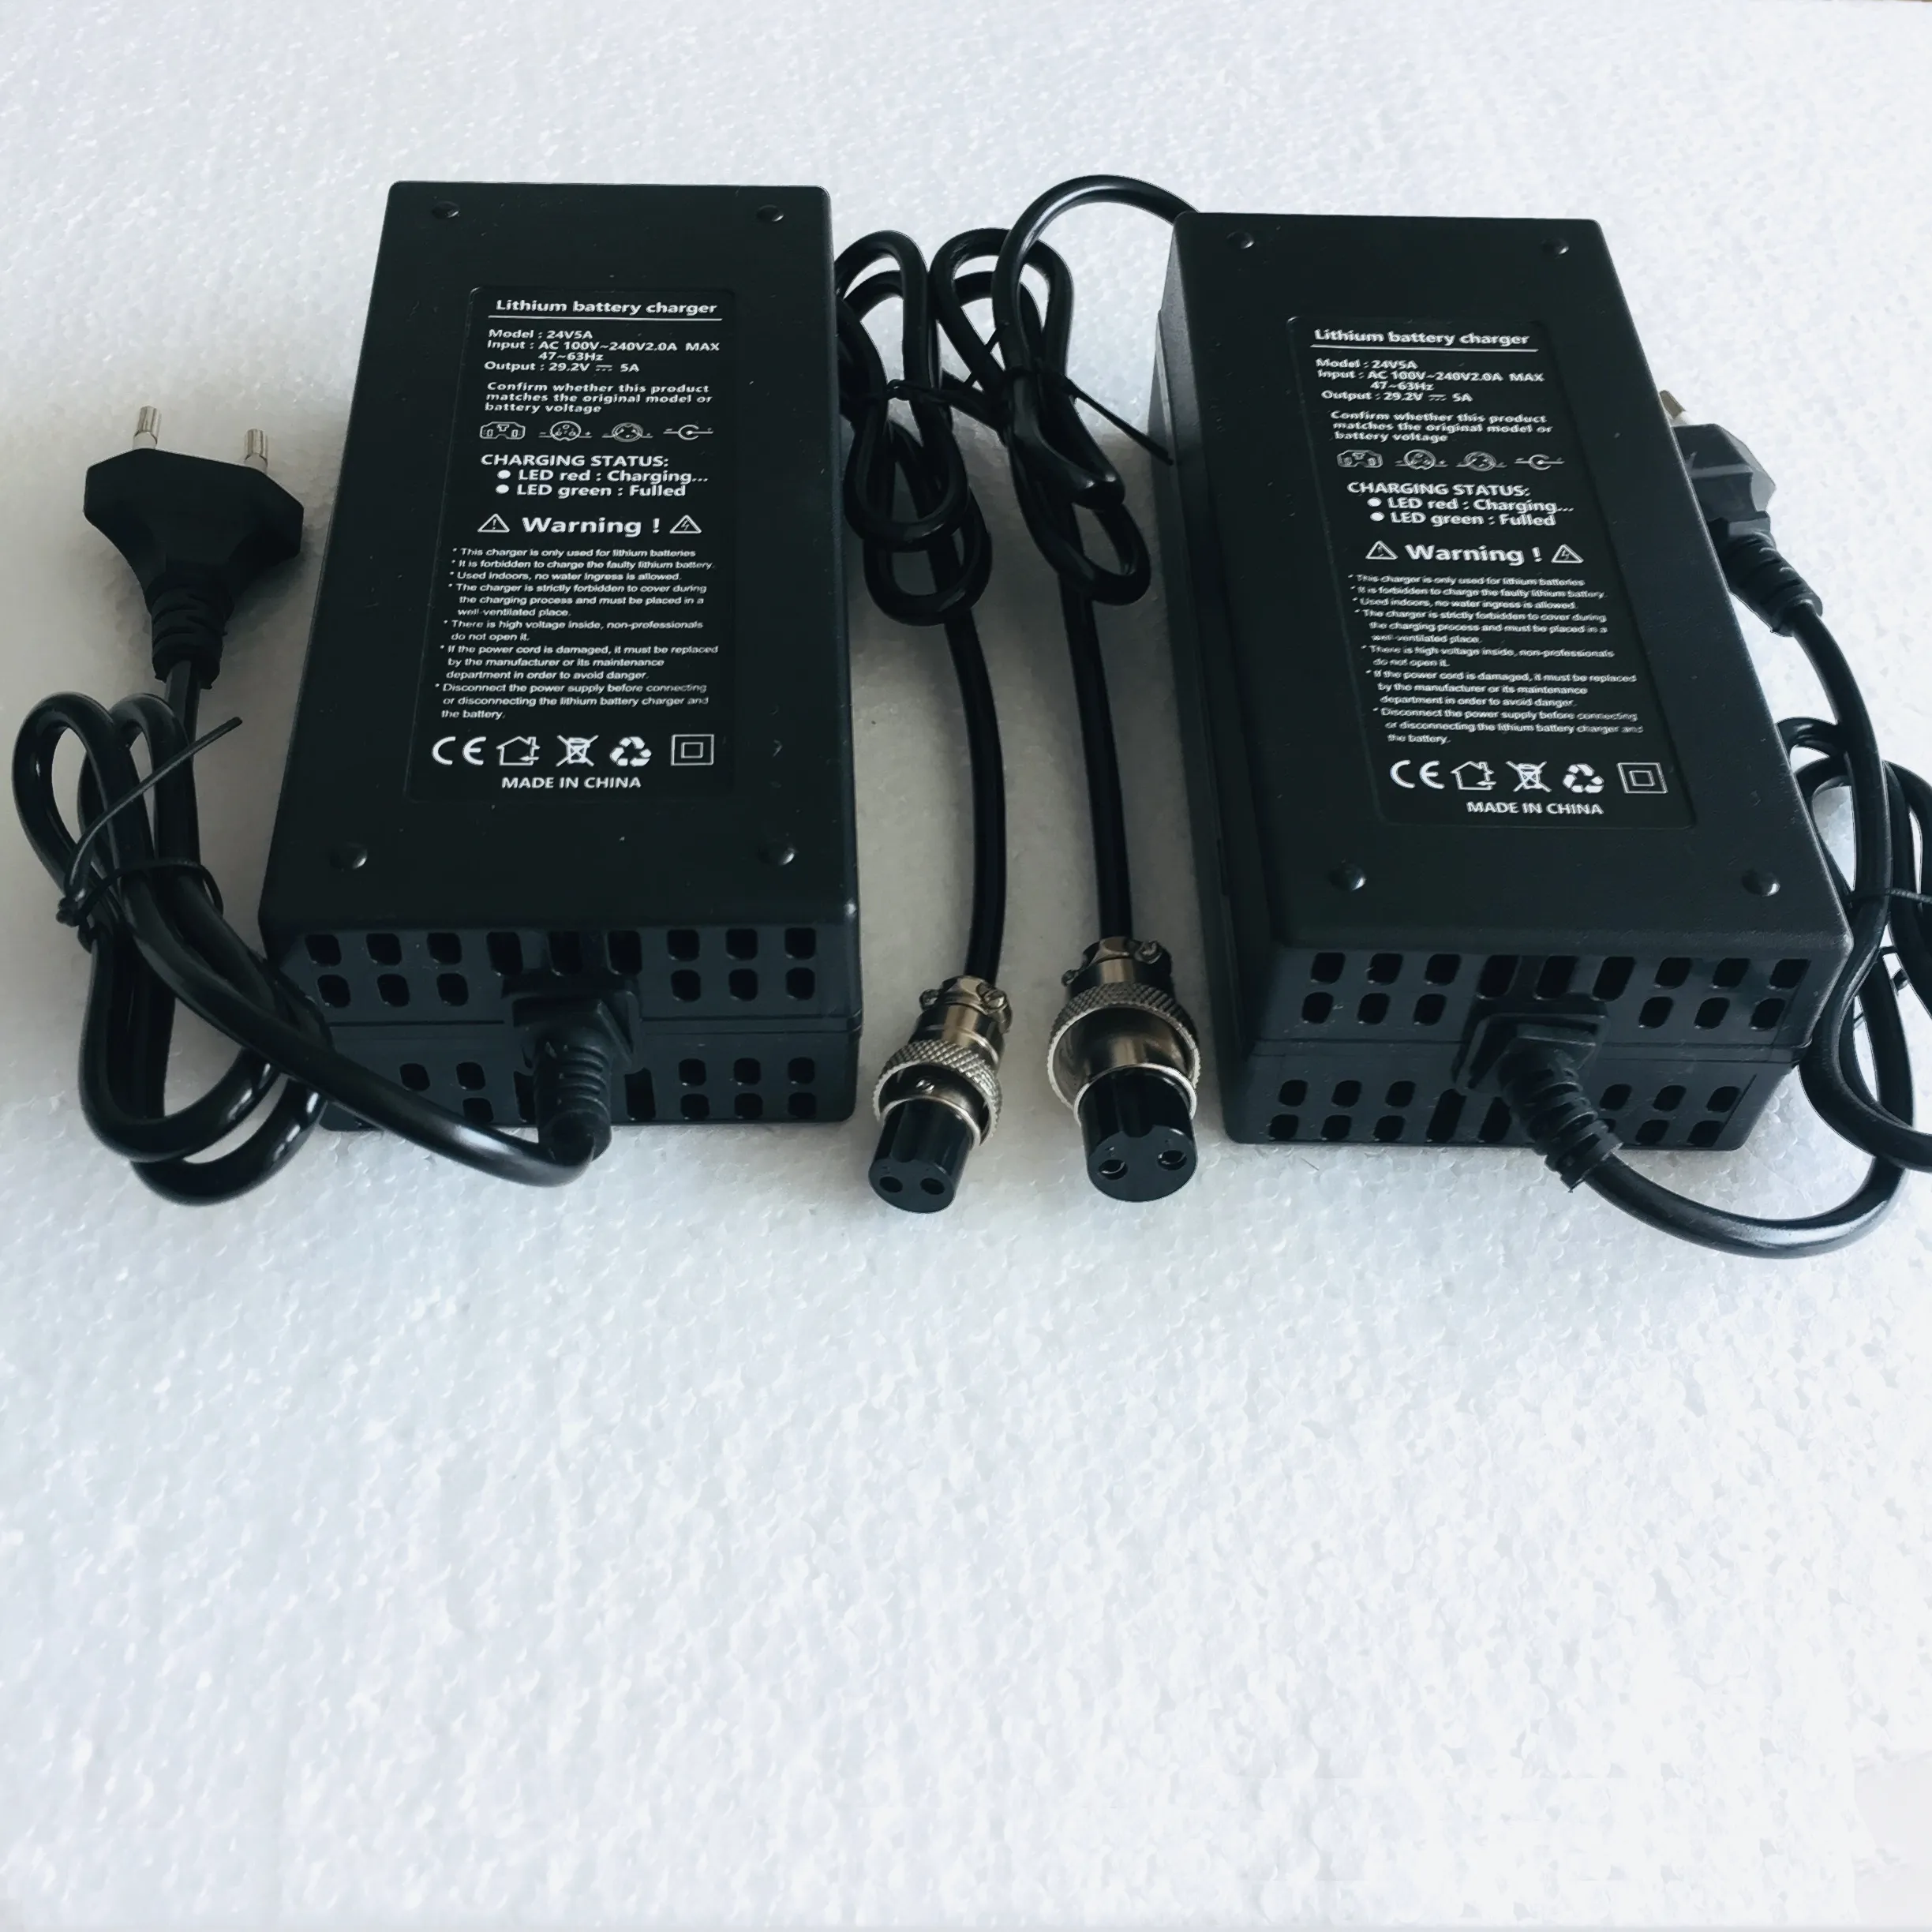 29.2v5a 8S LifePO4 battery charger device ac 100-240v to dc 25.2v 5a chargers batteries power supply